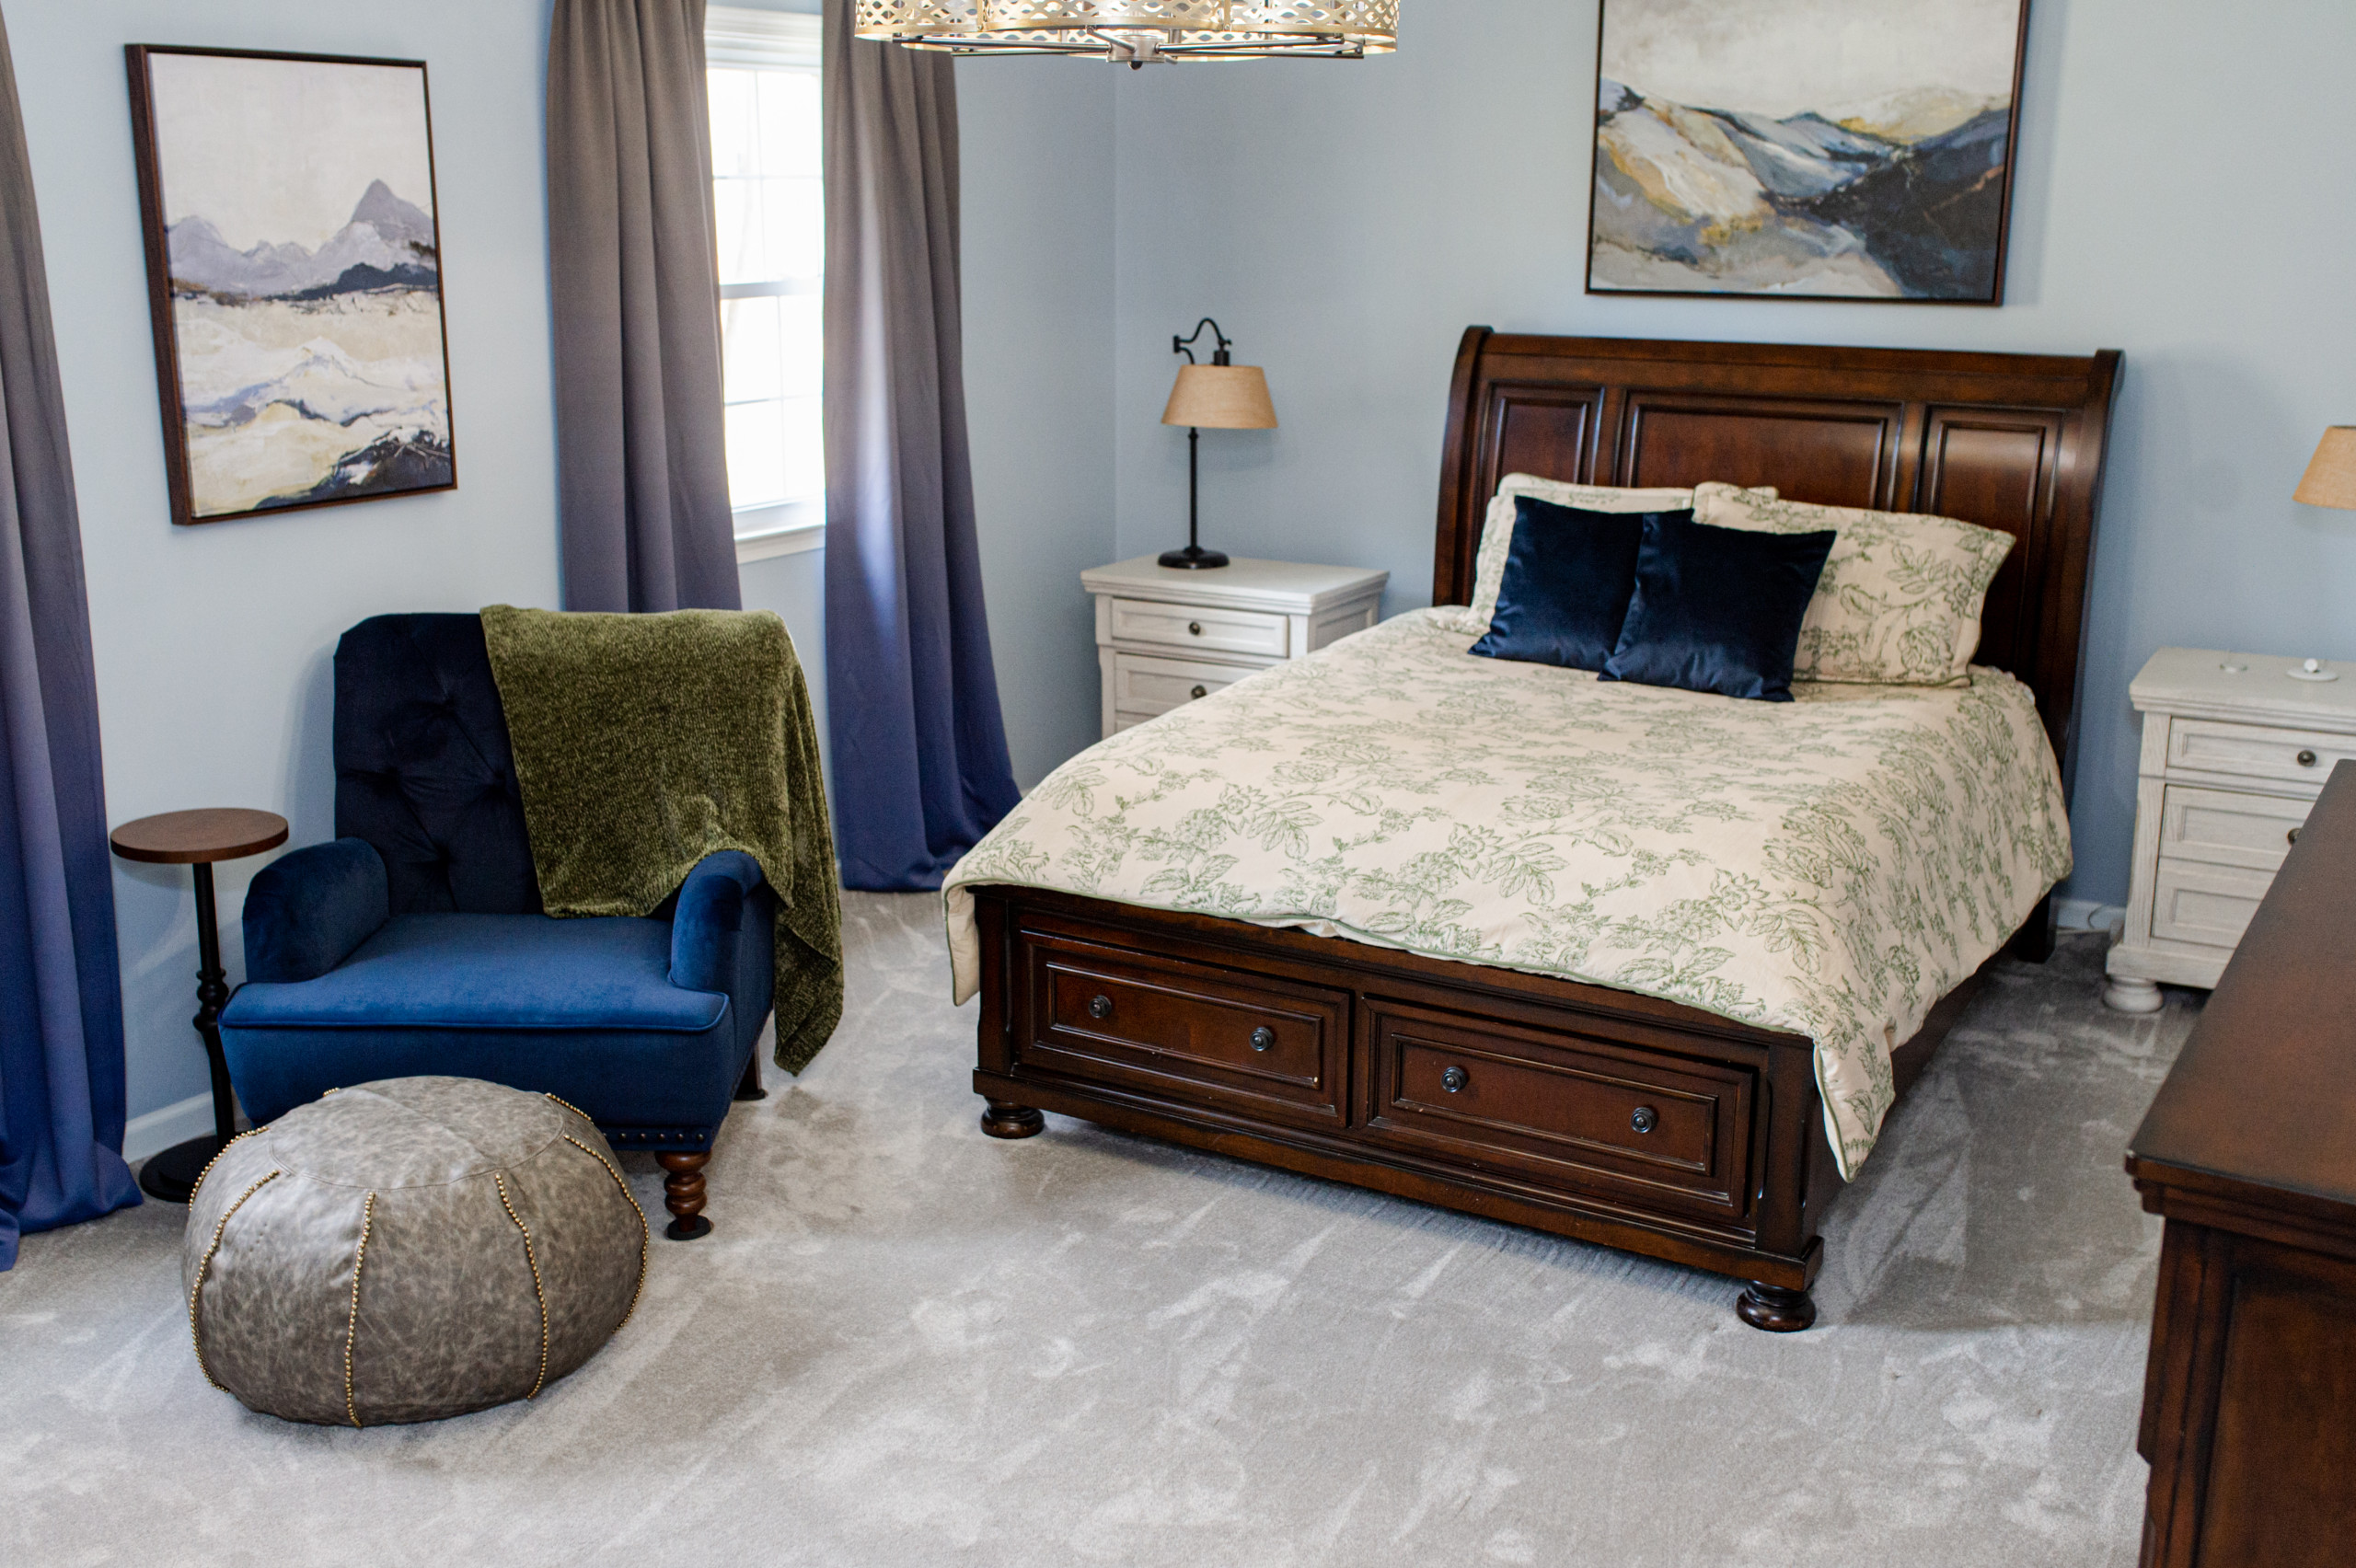 Traditional style Owner's Bedroom with queen size bed, seating area with pouf ottoman, accent color nightstands, fandelier, and navy blue and olive green accent colors